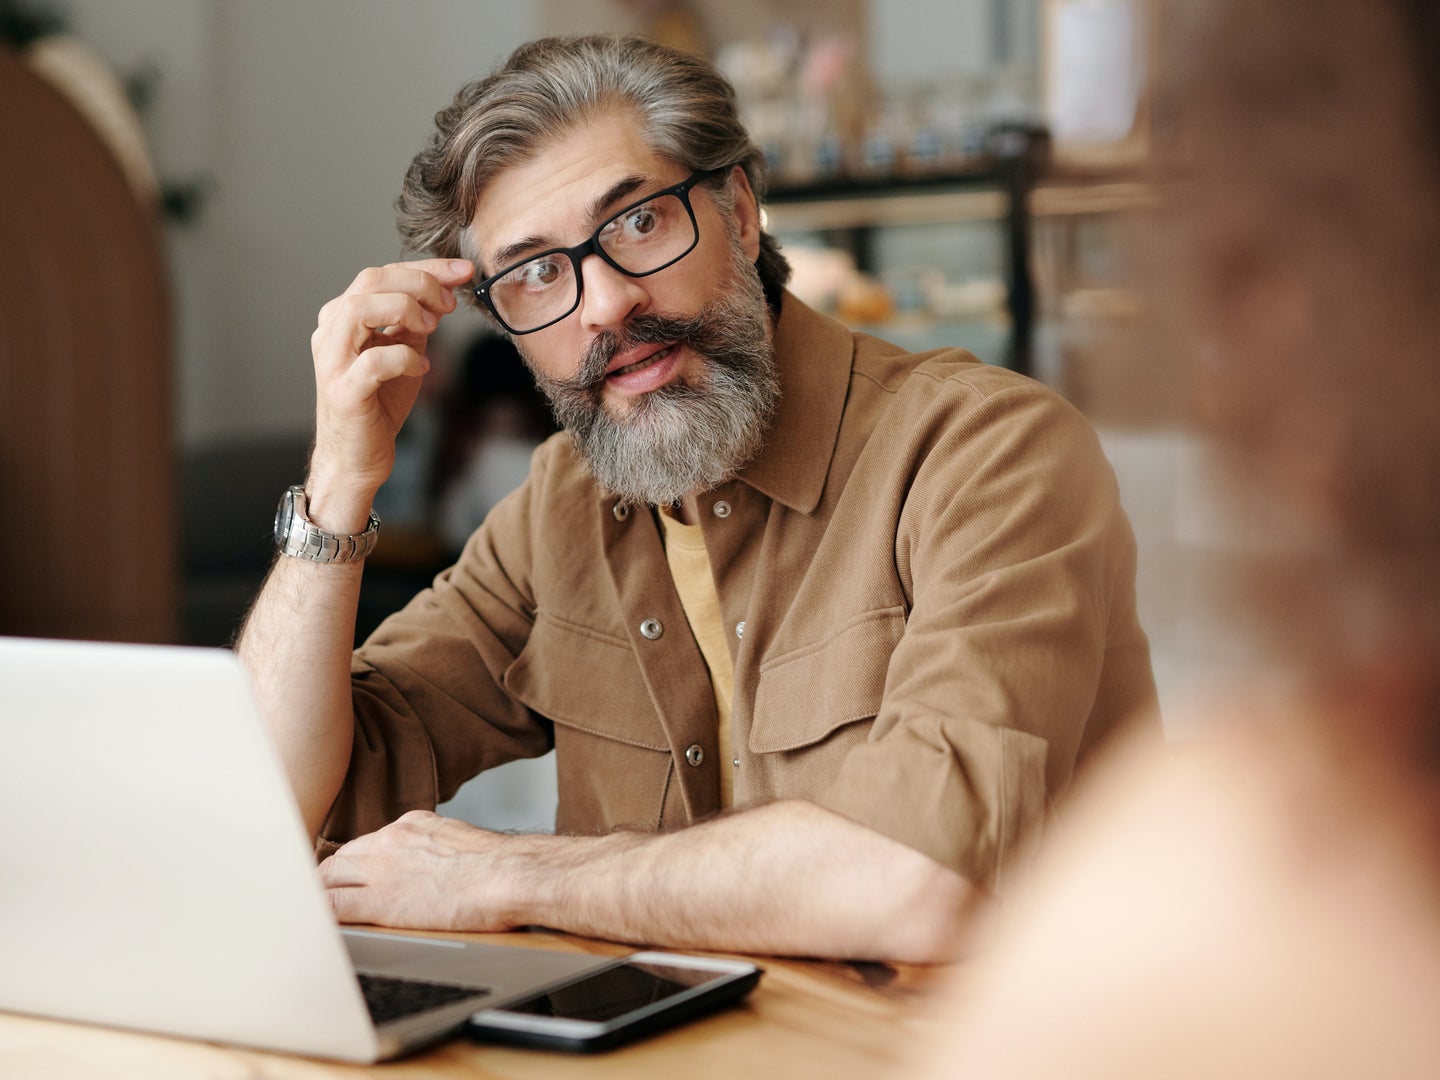 a bearded man with glasses looking stressed and confused while using a laptop computer